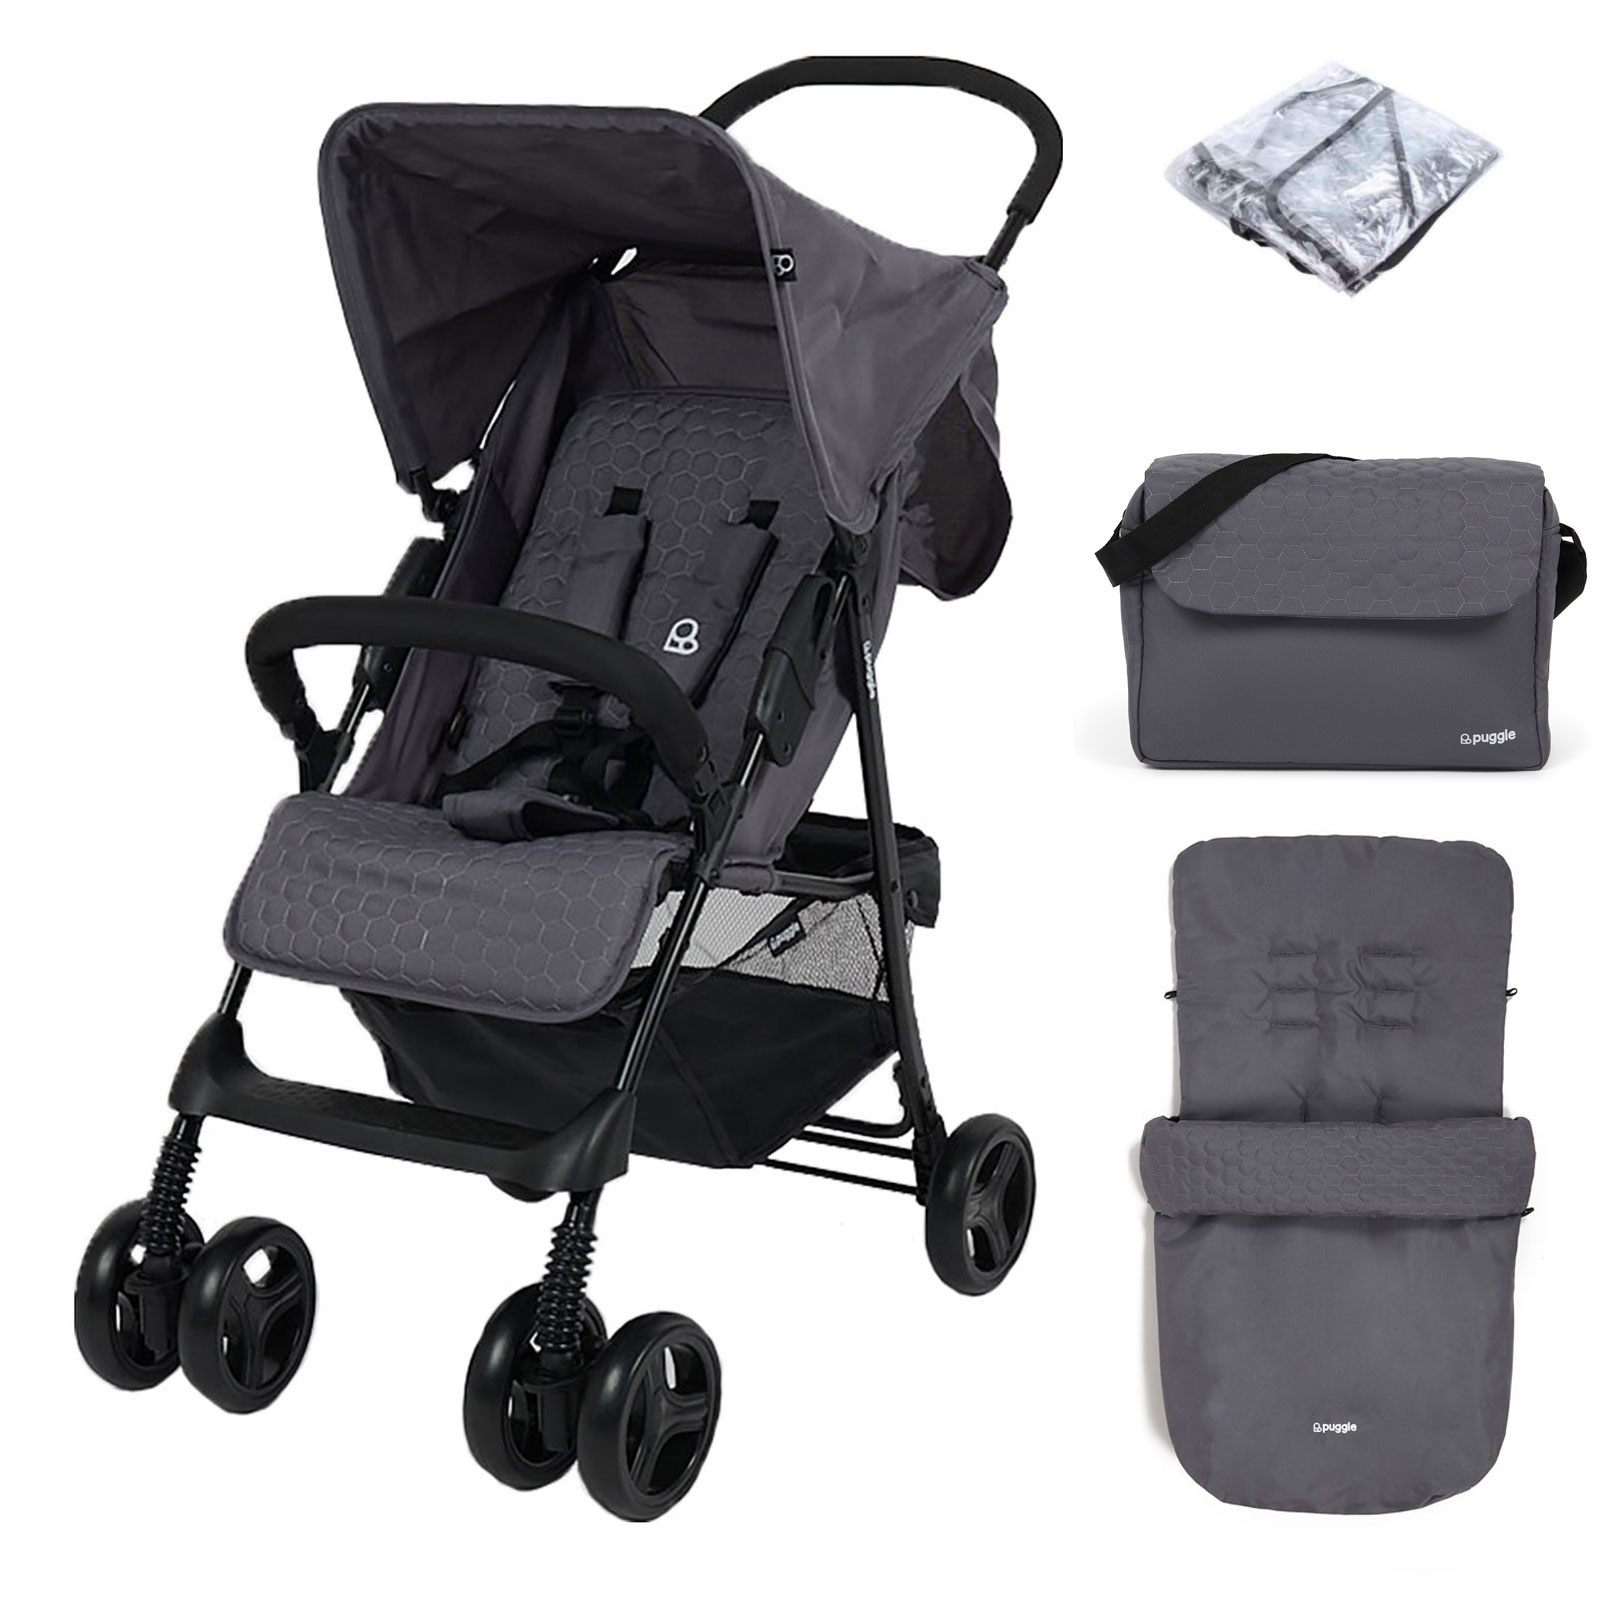 Puggle Holiday Luxe Pushchair Stroller with Raincover, Universal Footmuff, Changing Bag and Mat – Slate Grey